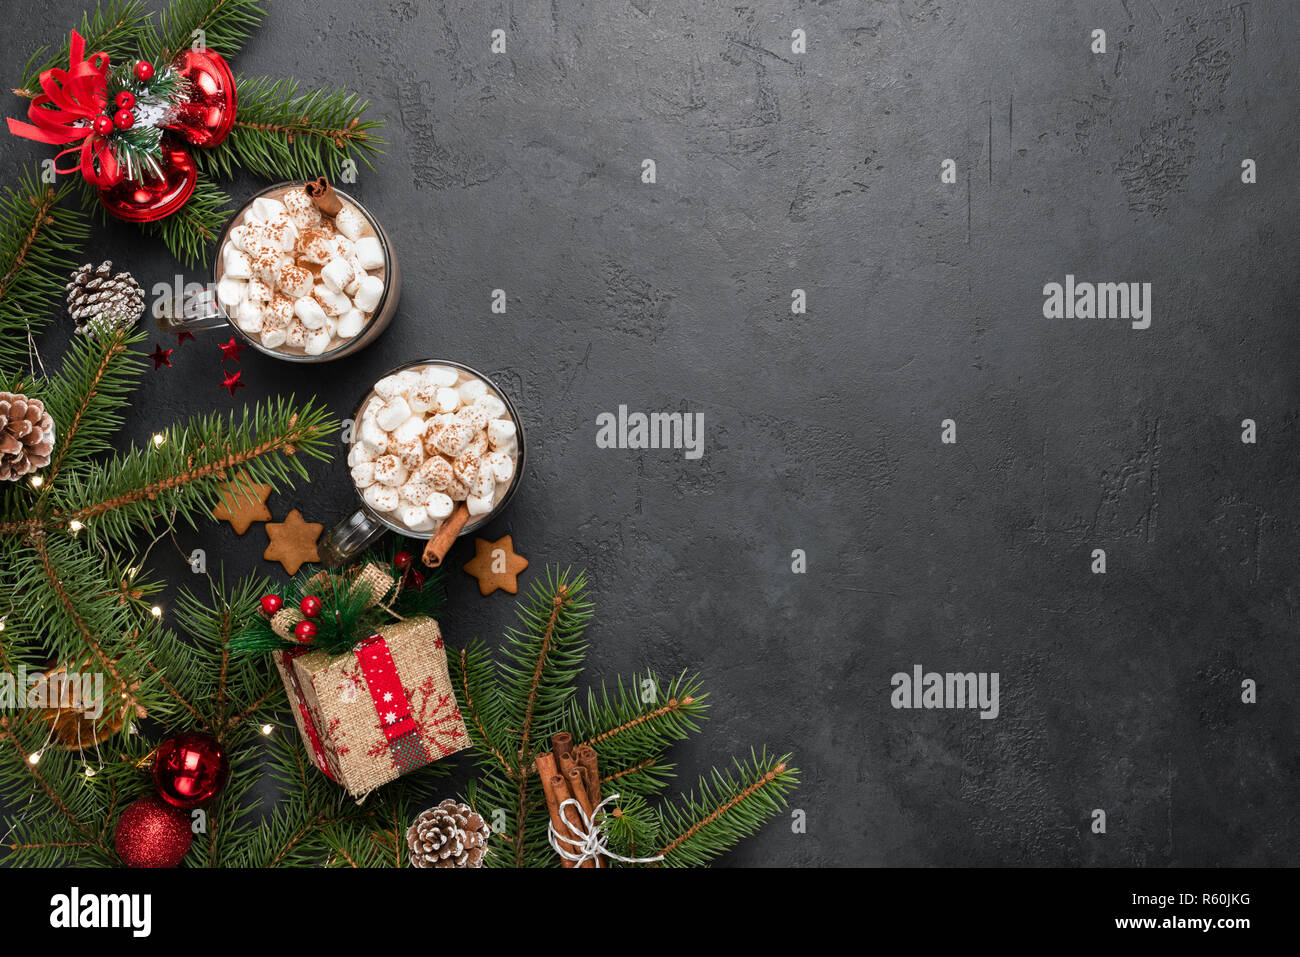 Christmas background with decorations and copy space for text. Christmas greeting card or design template with copy space for text. Stock Photo